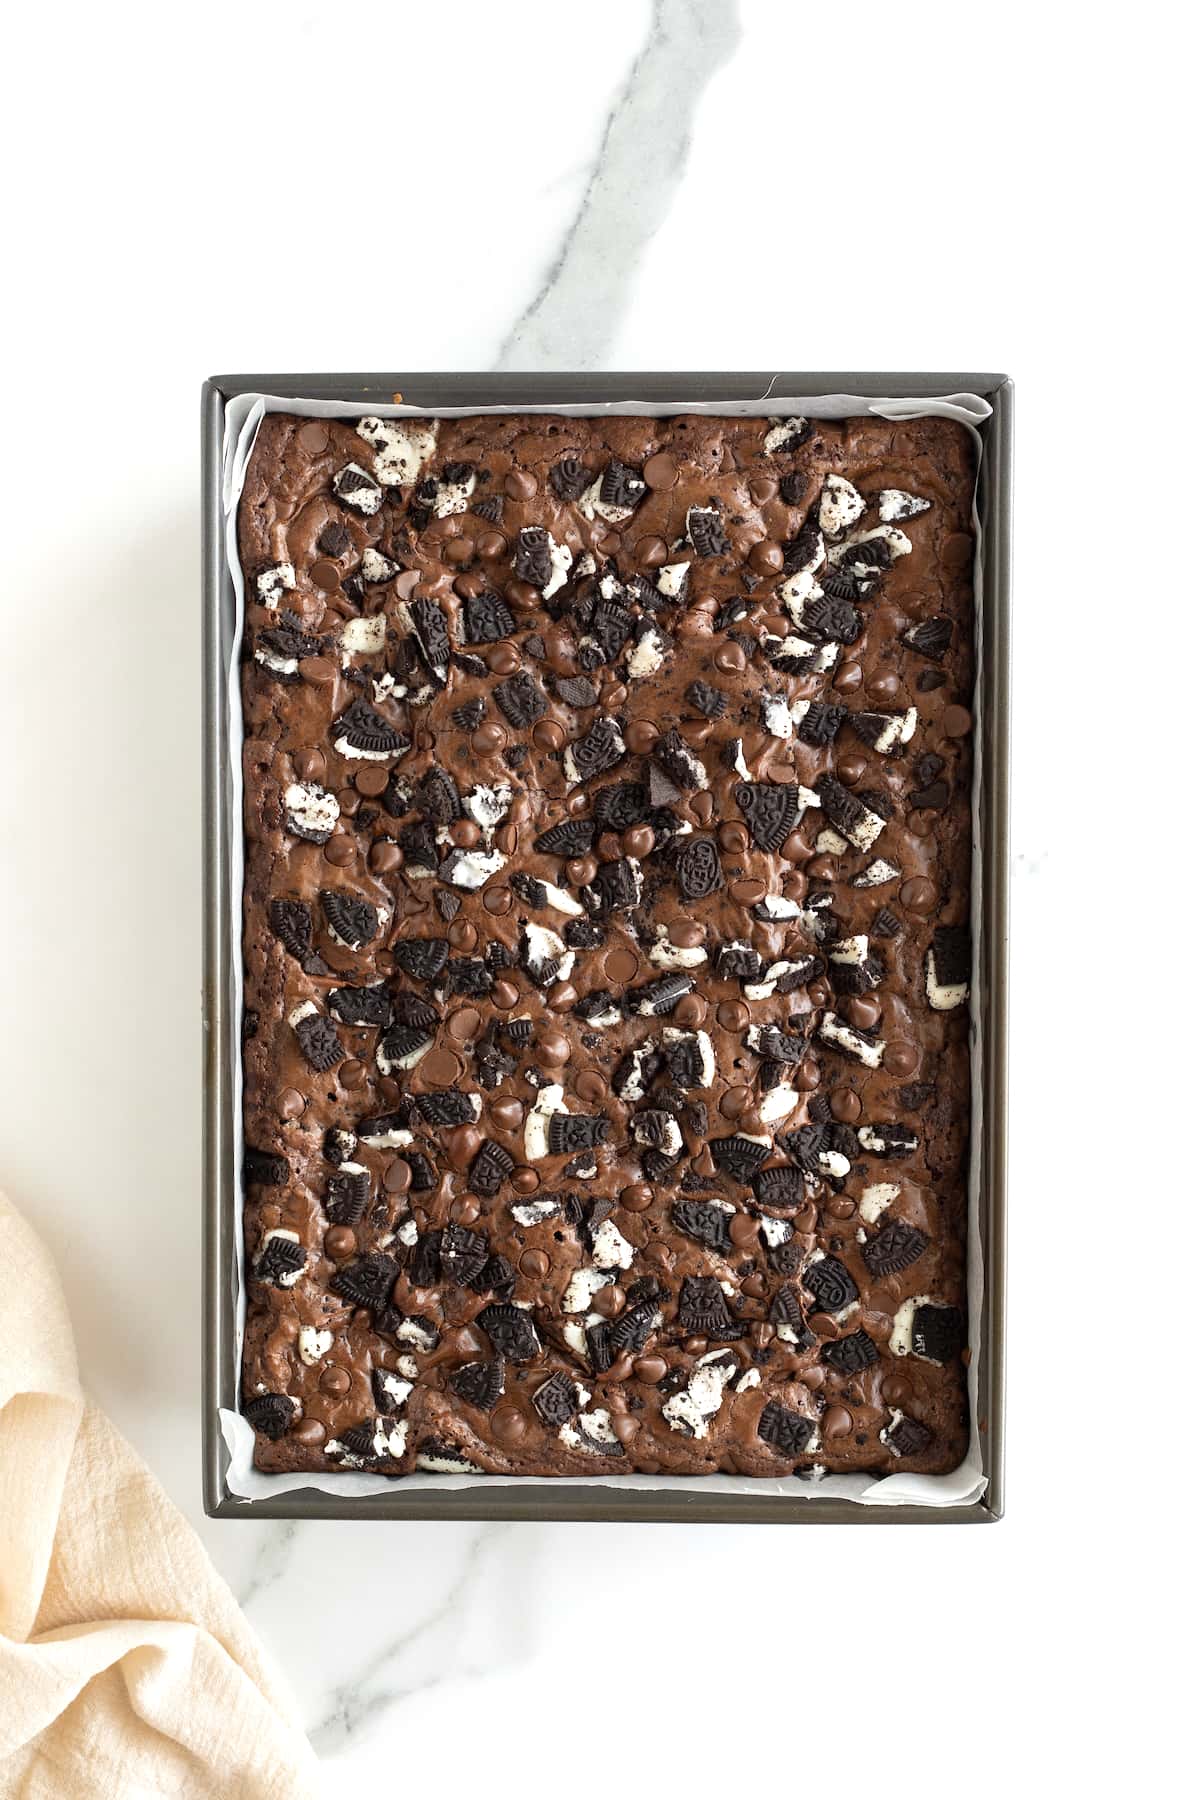 A pan of three layer brownies topped with Oreo pieces and chocolate chips.